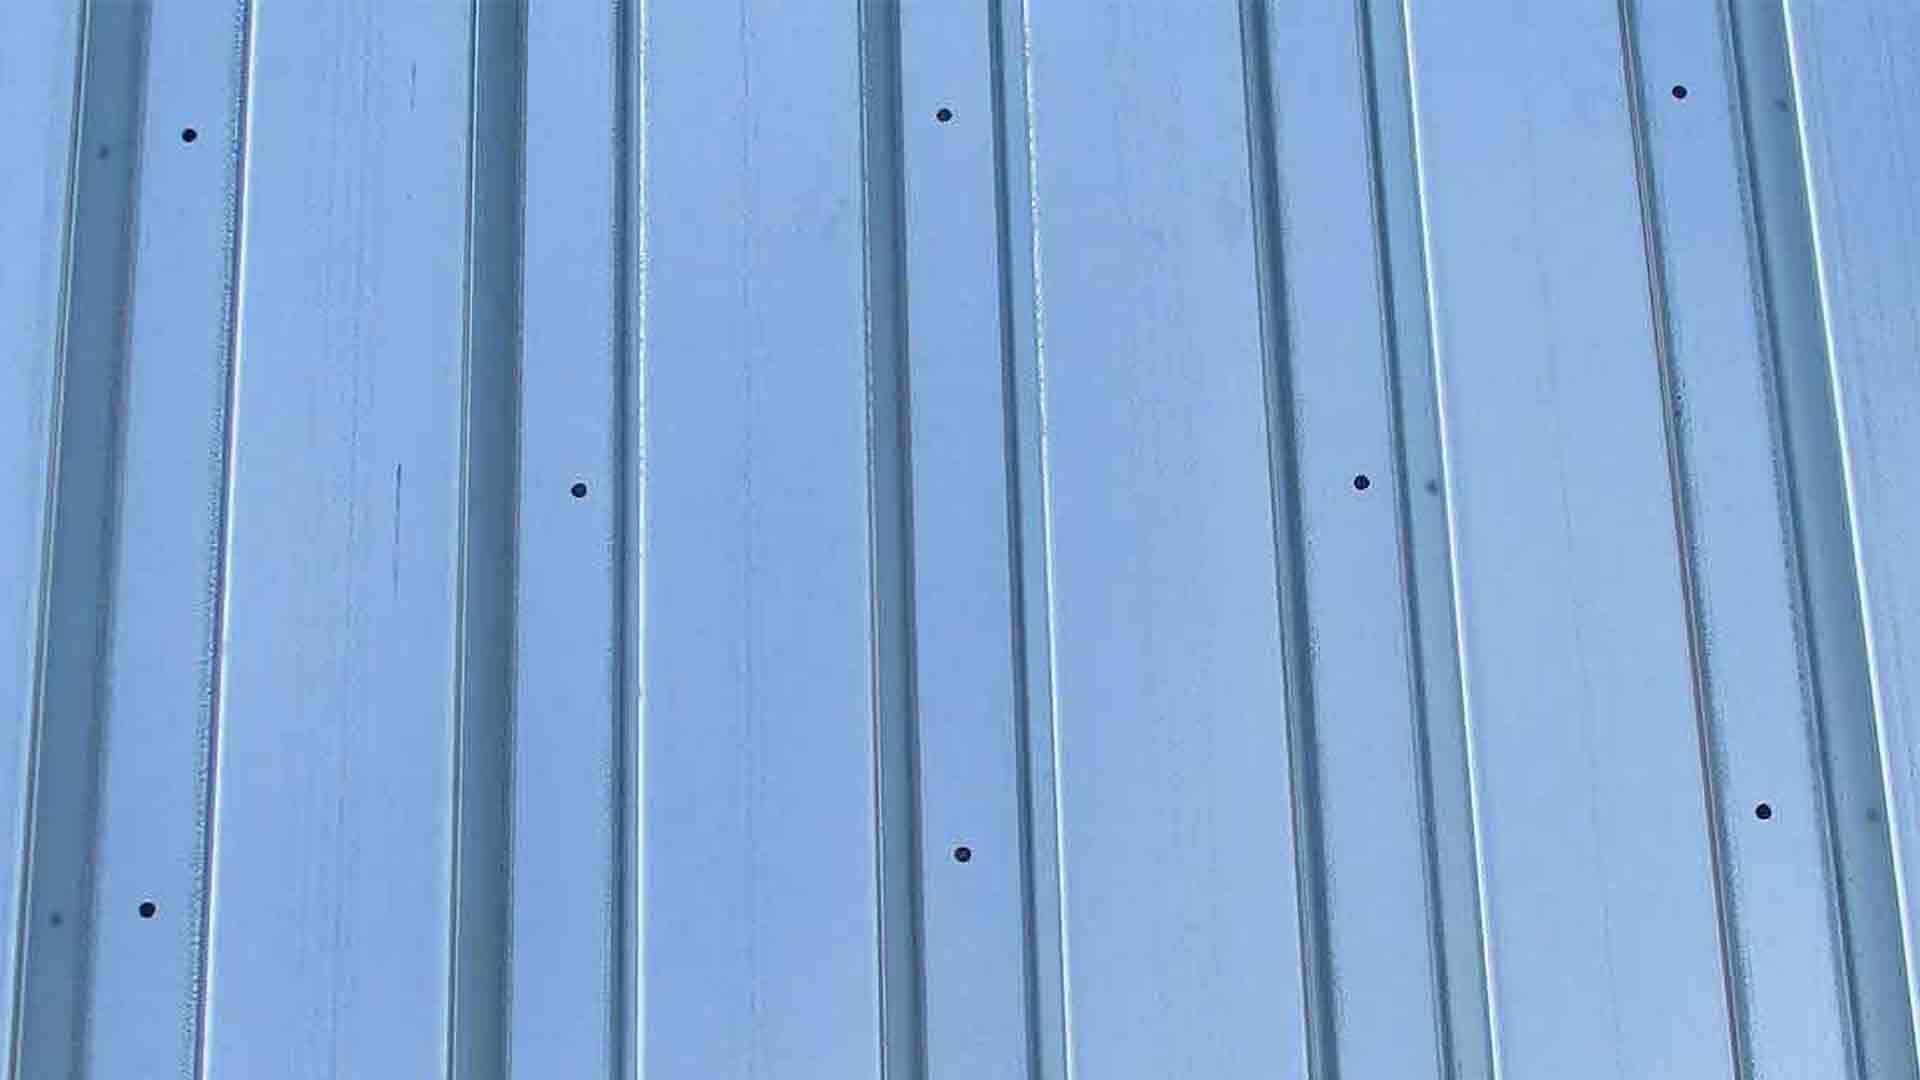 Vented Metal Decking: A Guide To Field Venting